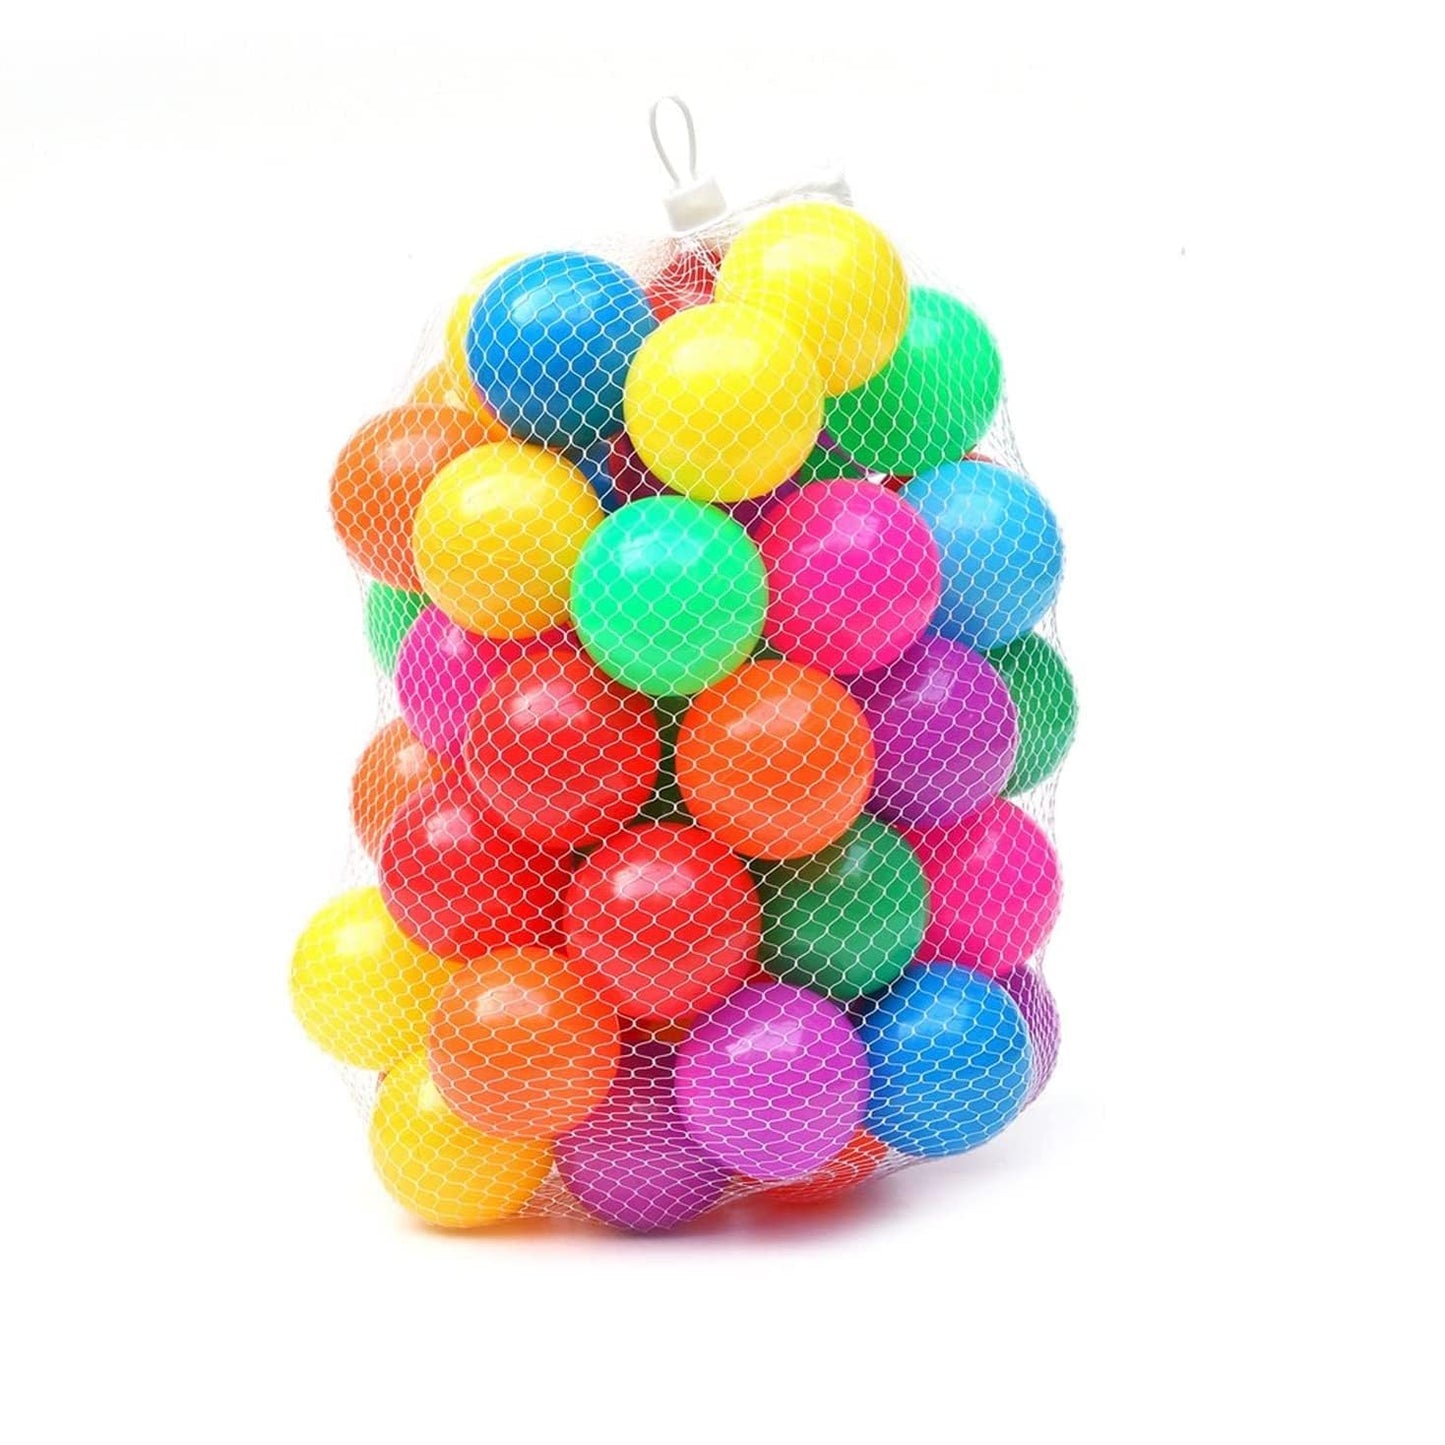 BAYBEE Soft Plastic Baby Pit Balls for Kids Reusable Soft Crush Proof Play Pit Balls - (96 Pcs)